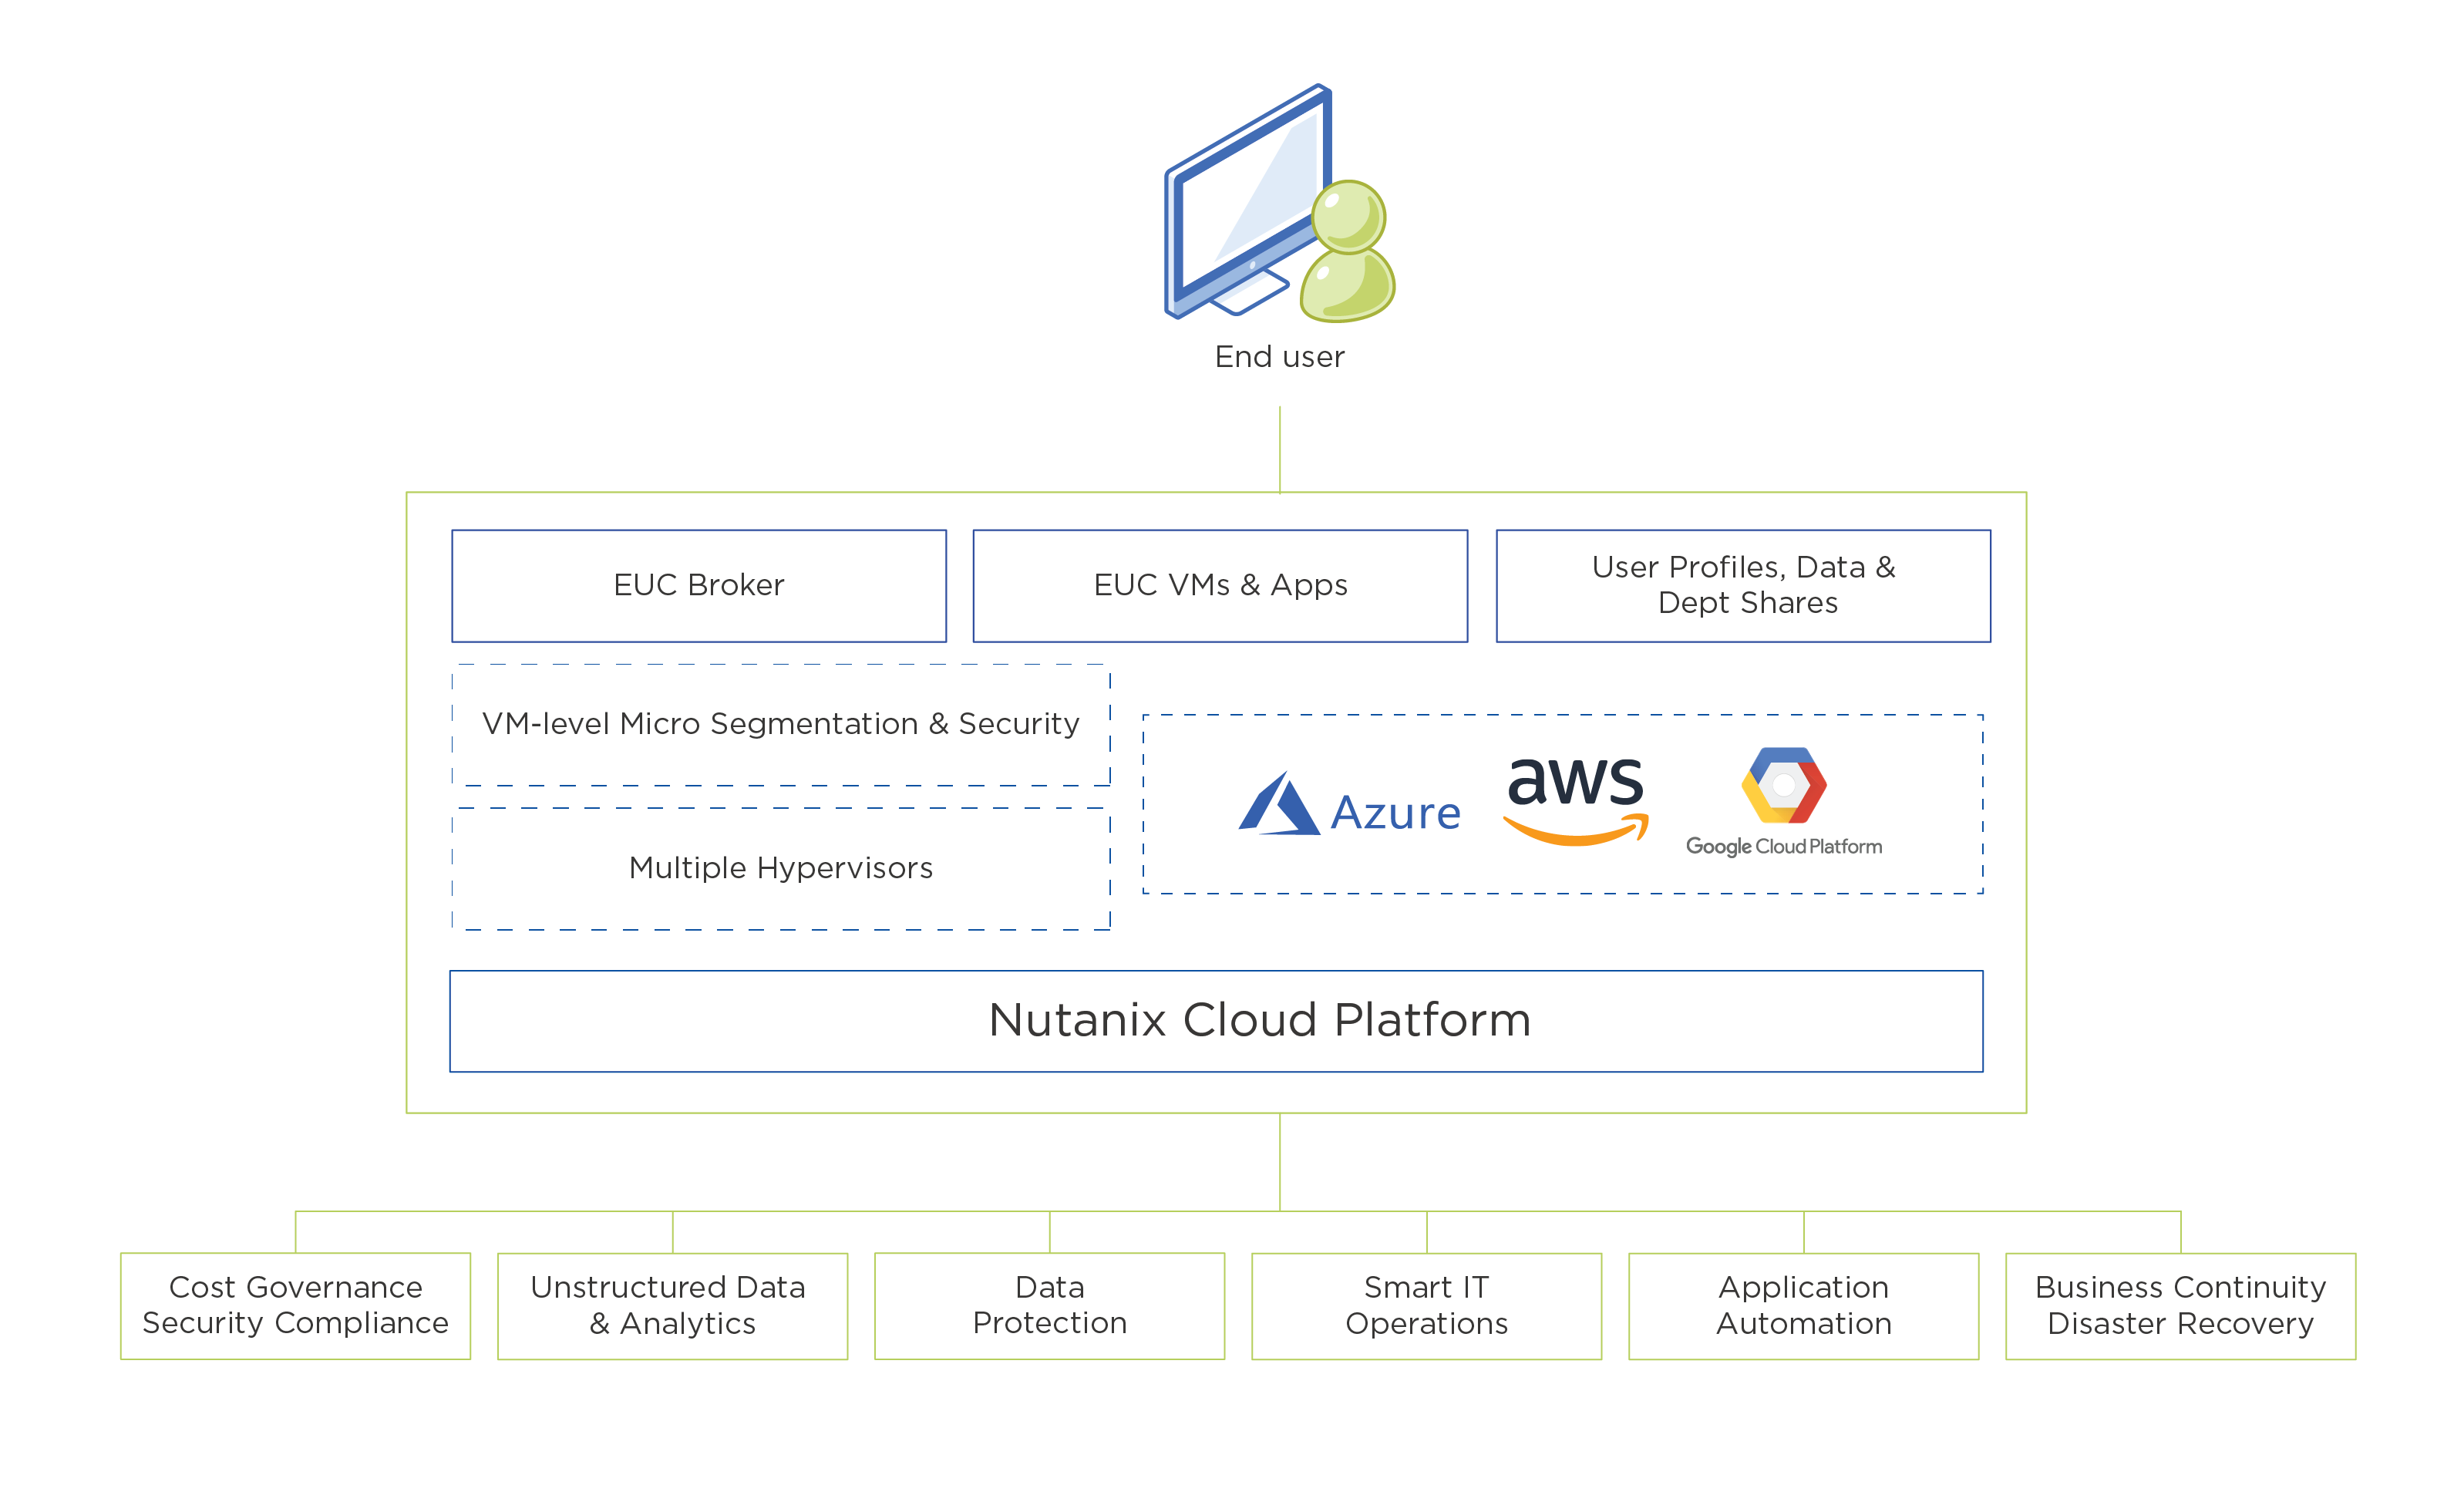 Complete EUC Solution from Nutanix: VDI and DaaS